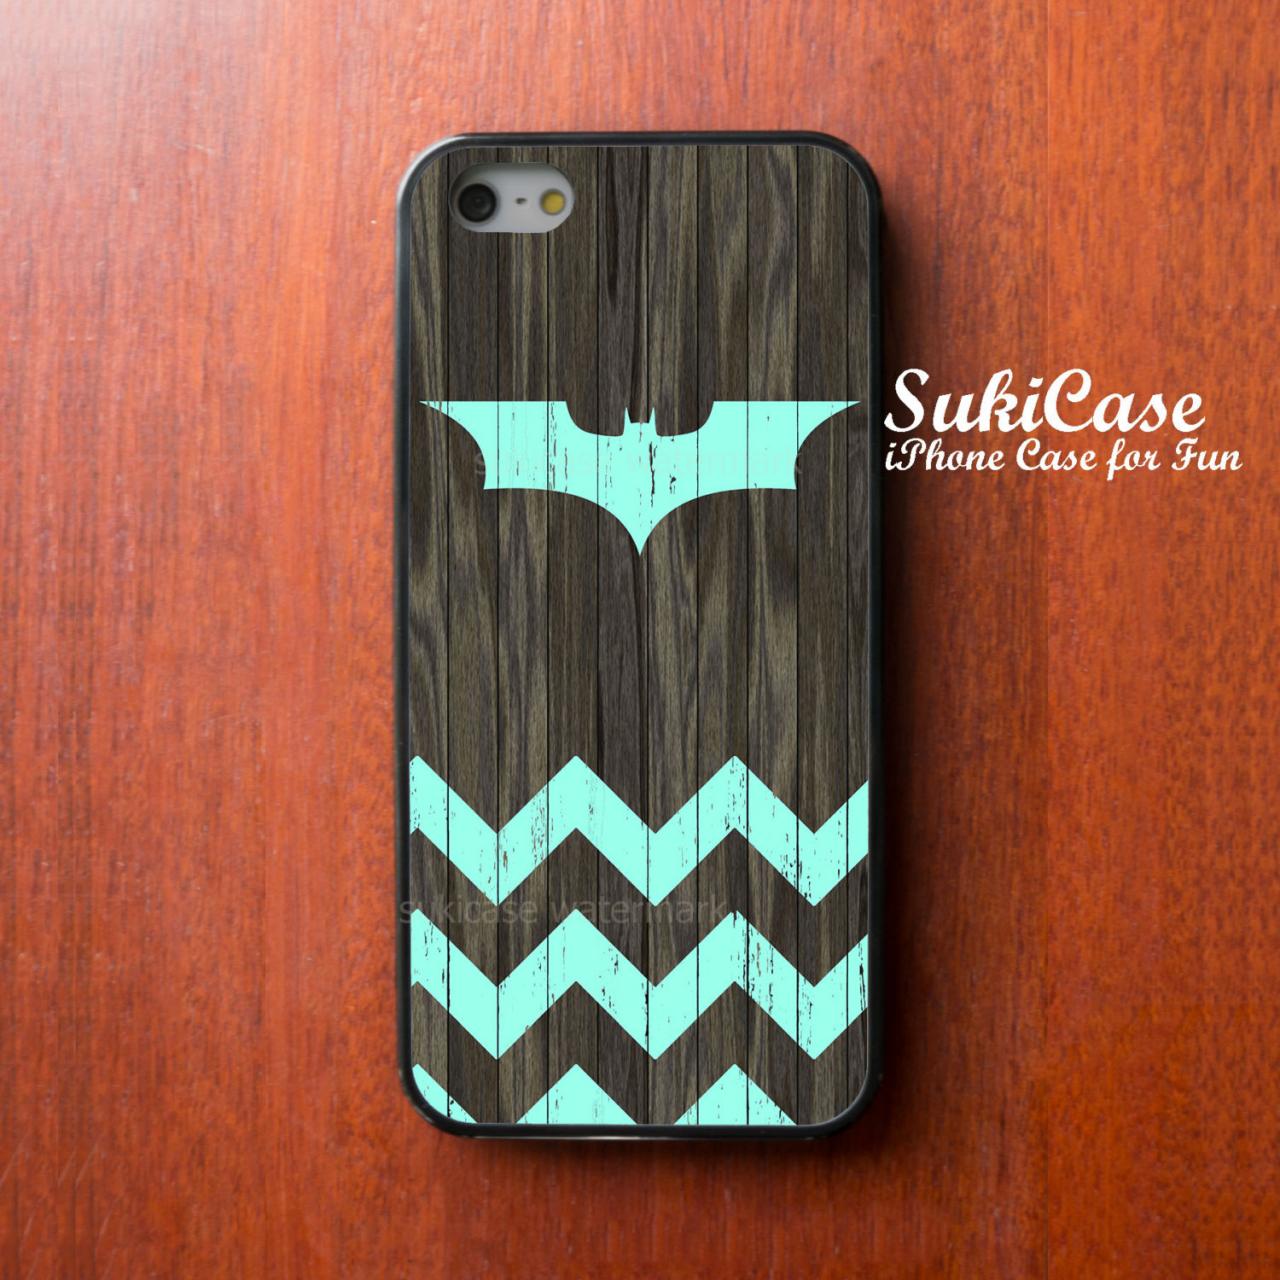 Iphone 5s Case Mint Bat And Chevron On Dark Wood Iphone Case Iphone 5 Case Iphone 4 Case Samsung Galaxy S4 S3 Cover Iphone 5c Iphone 4s